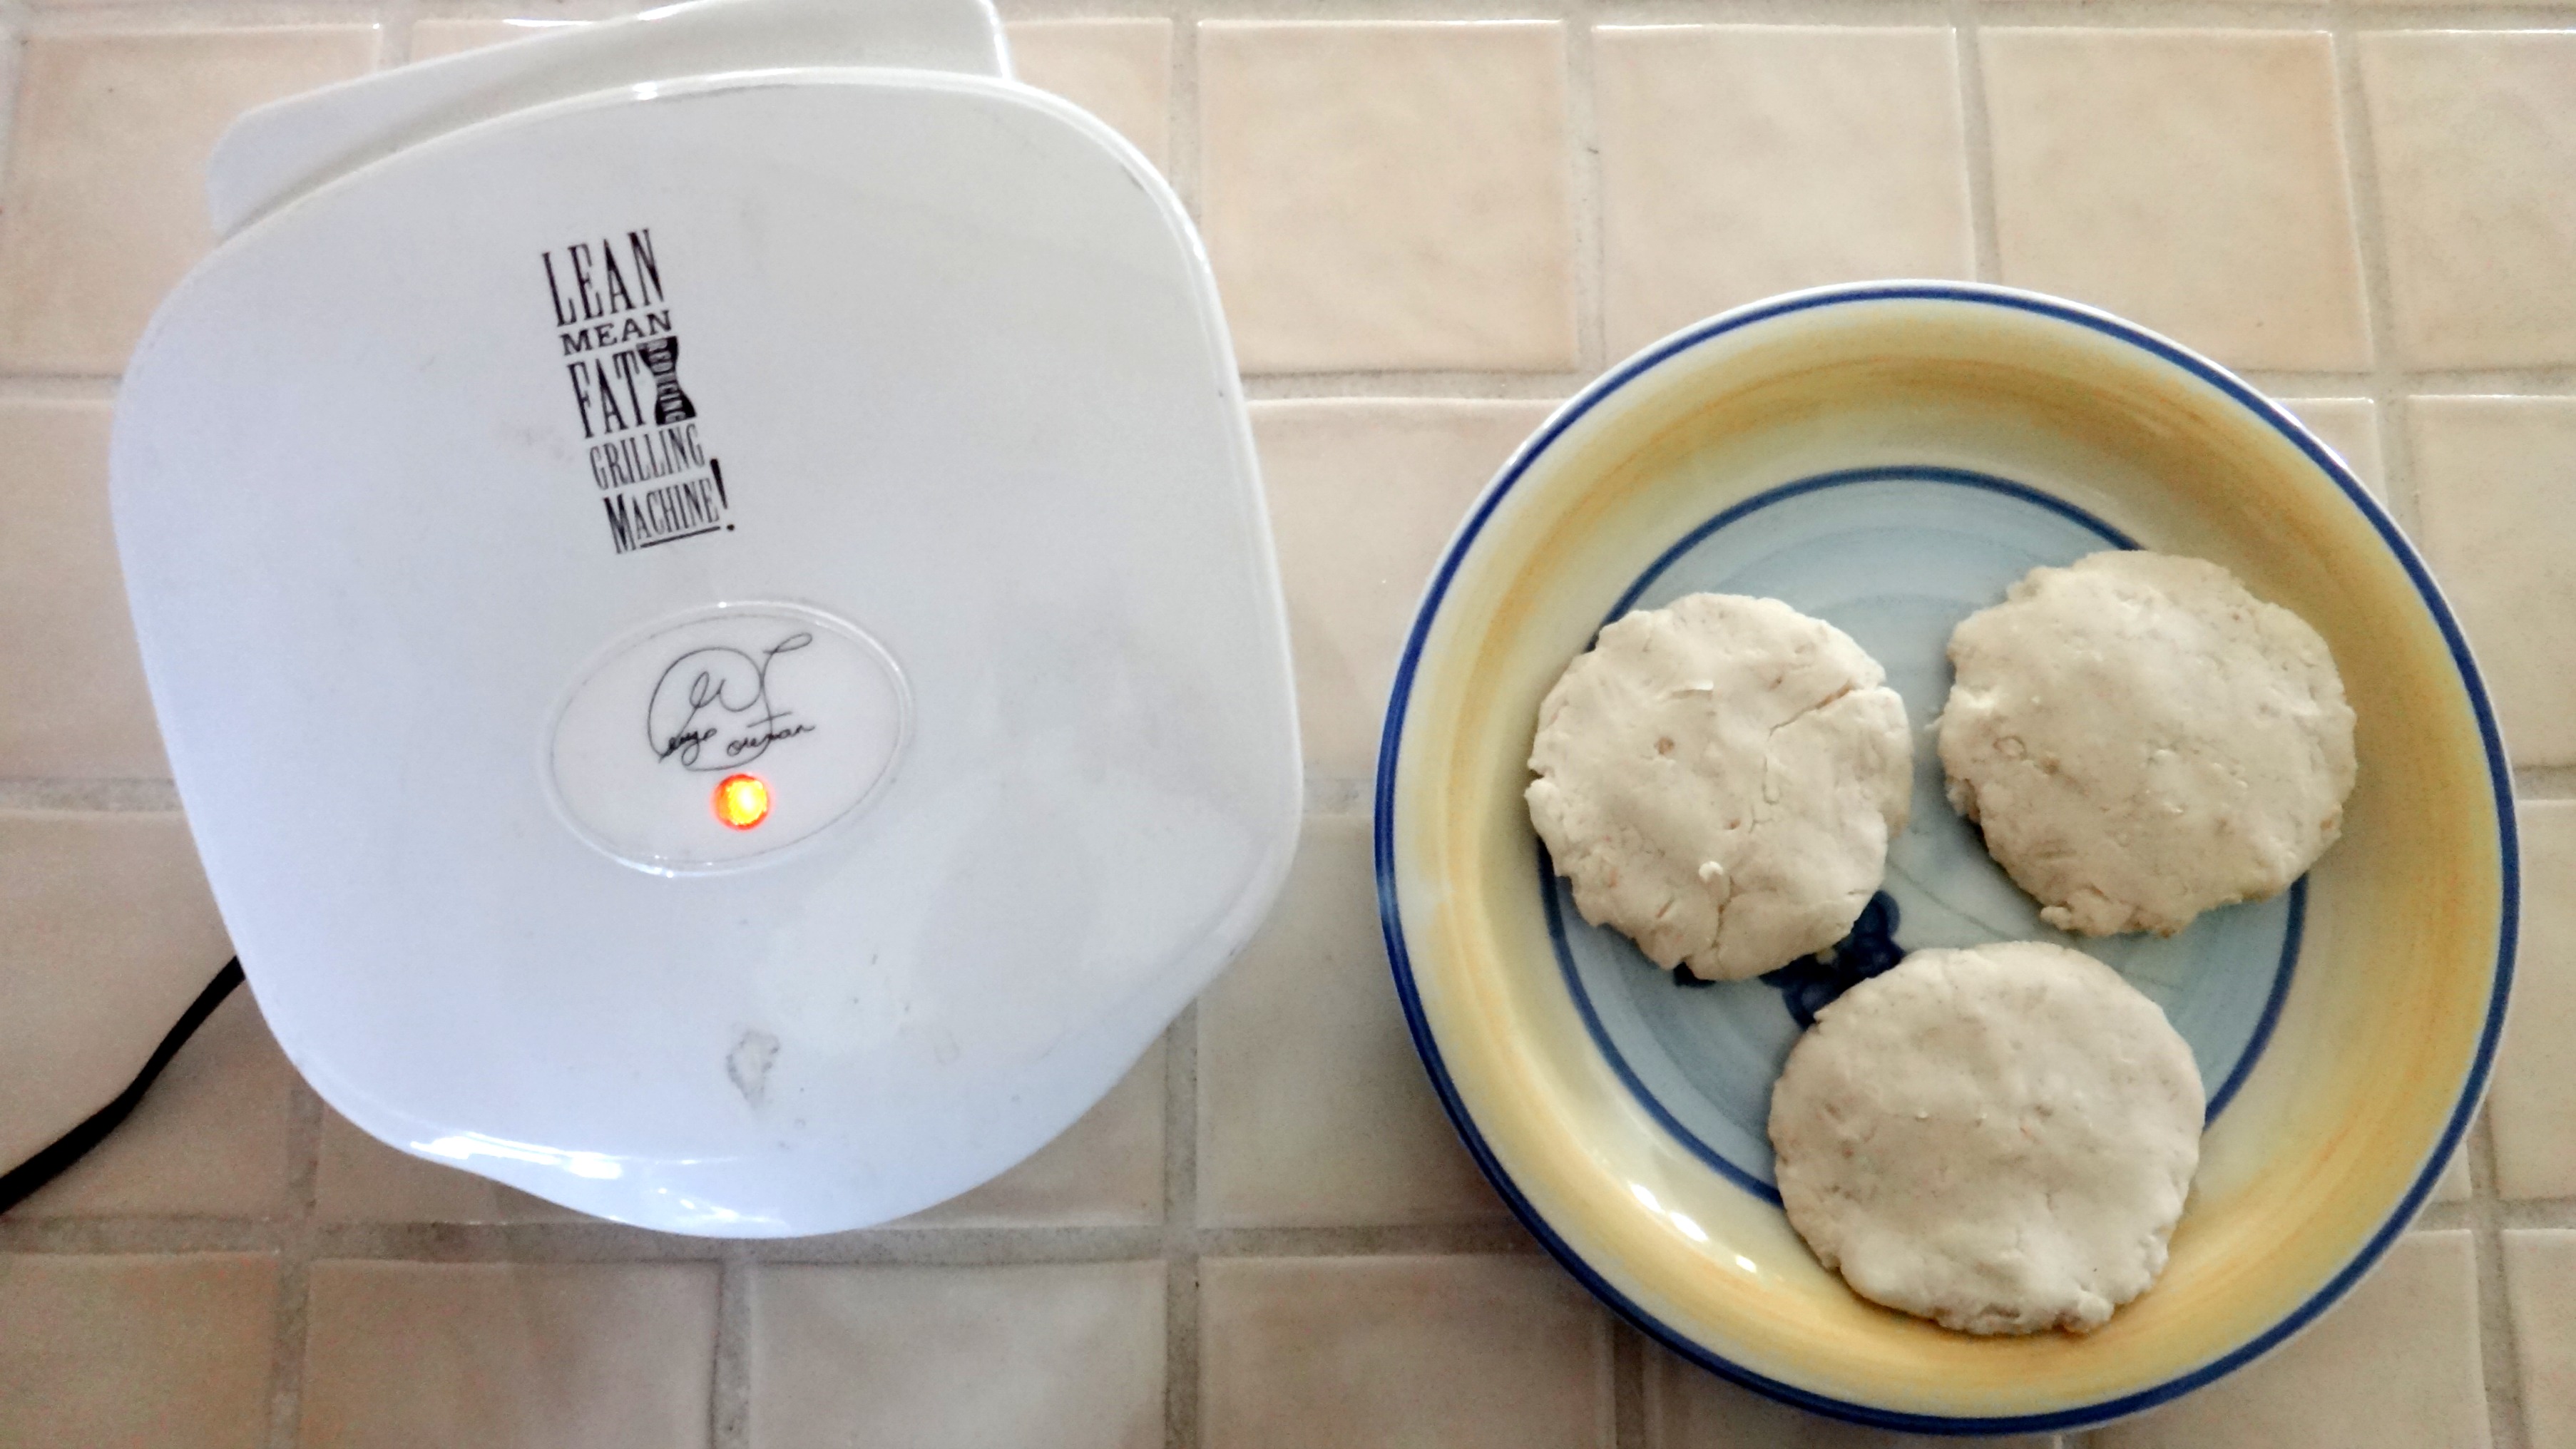 Cooking arepas with a George Foreman grill